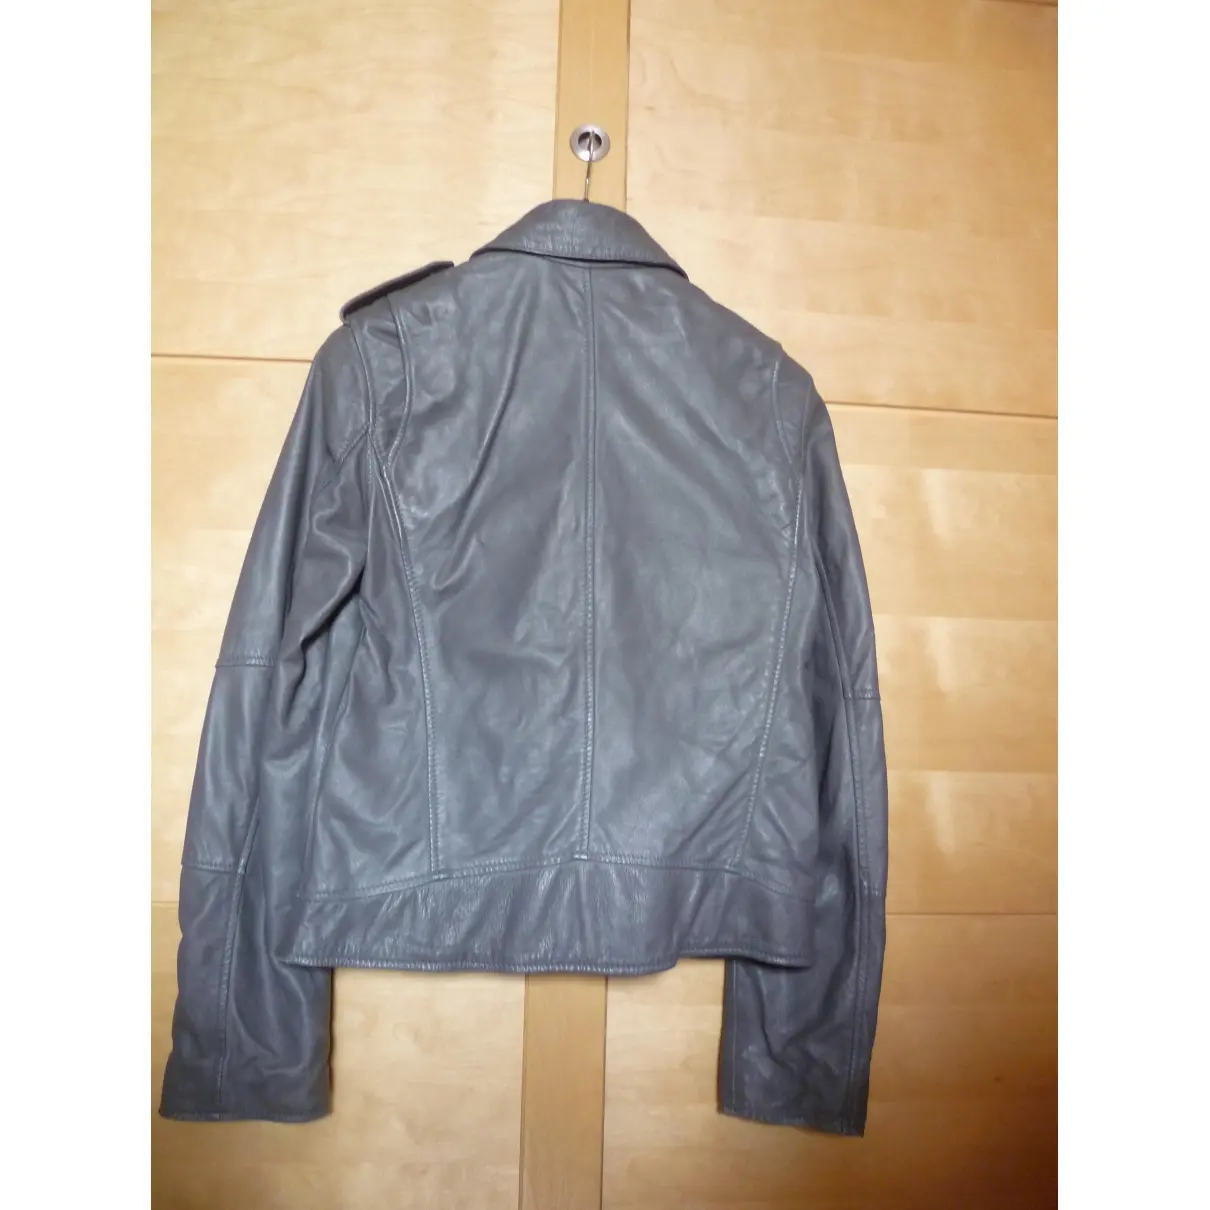 Zadig & Voltaire Leather jacket for sale